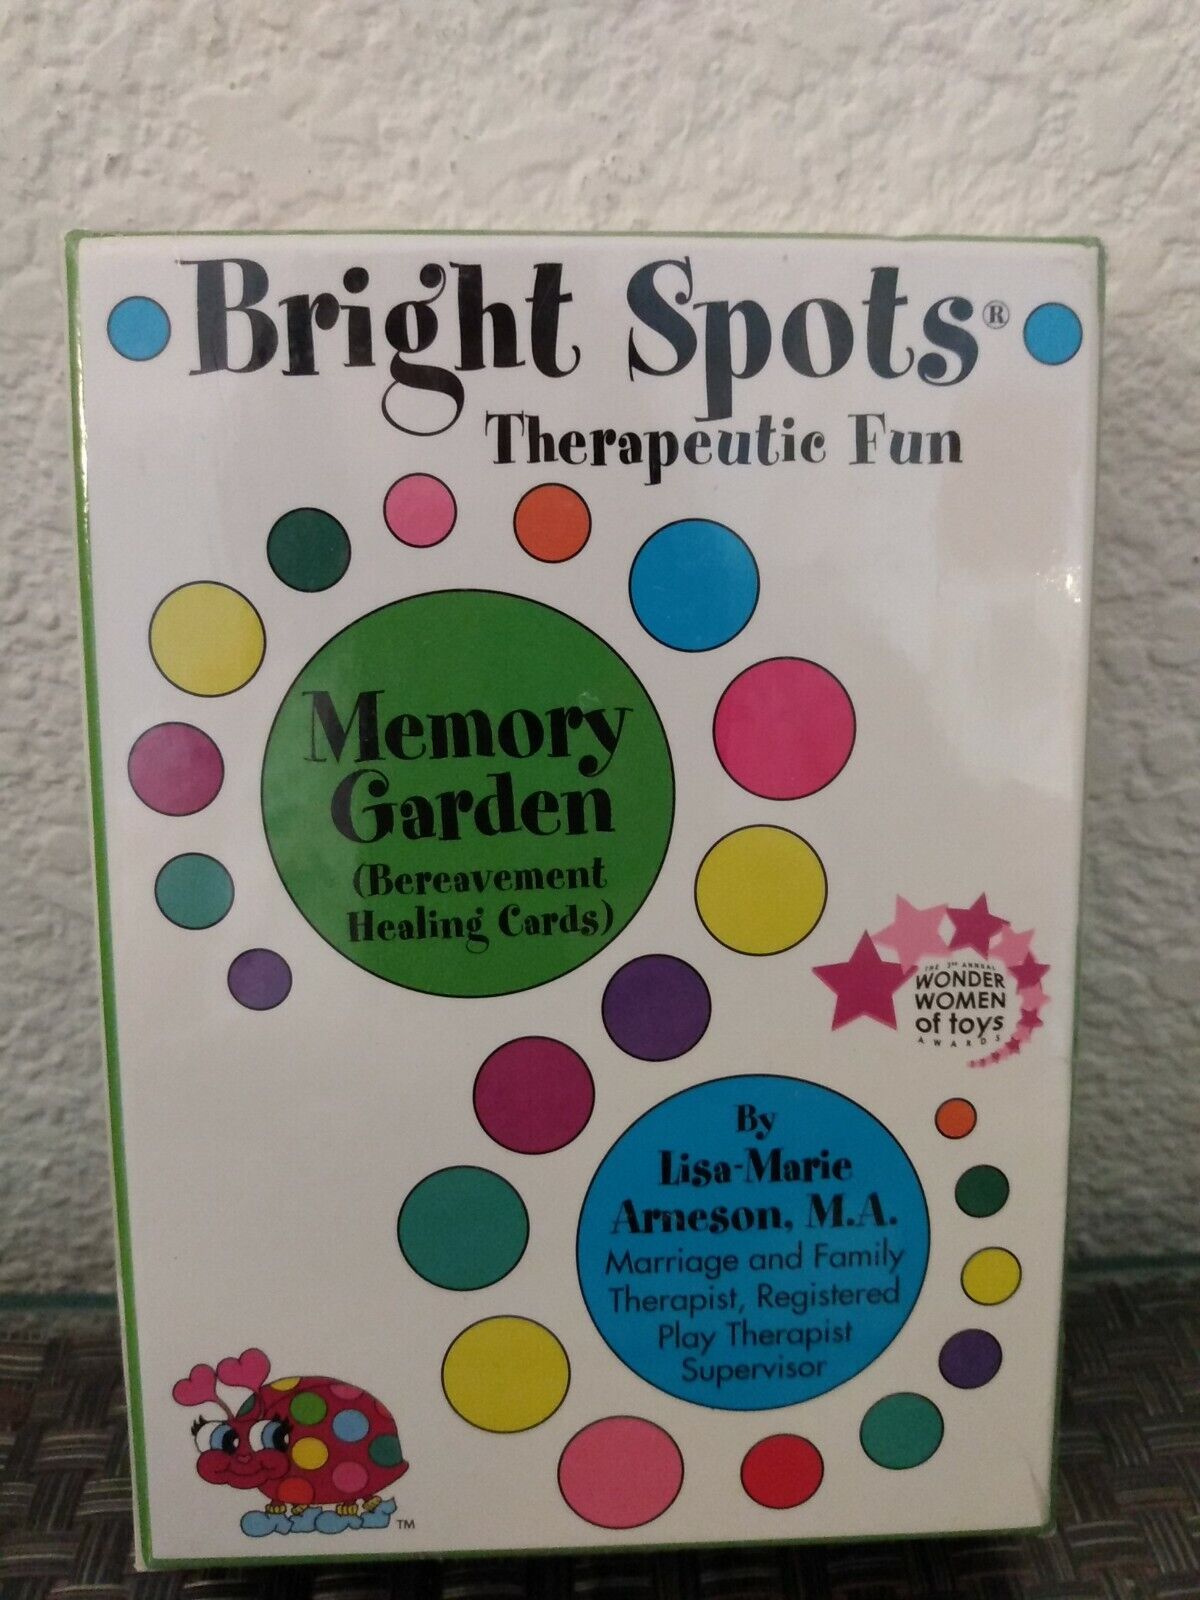 Memory Garden Bereavement Healing Cards 2nd Edition Bright Spots Therapeutic Fun